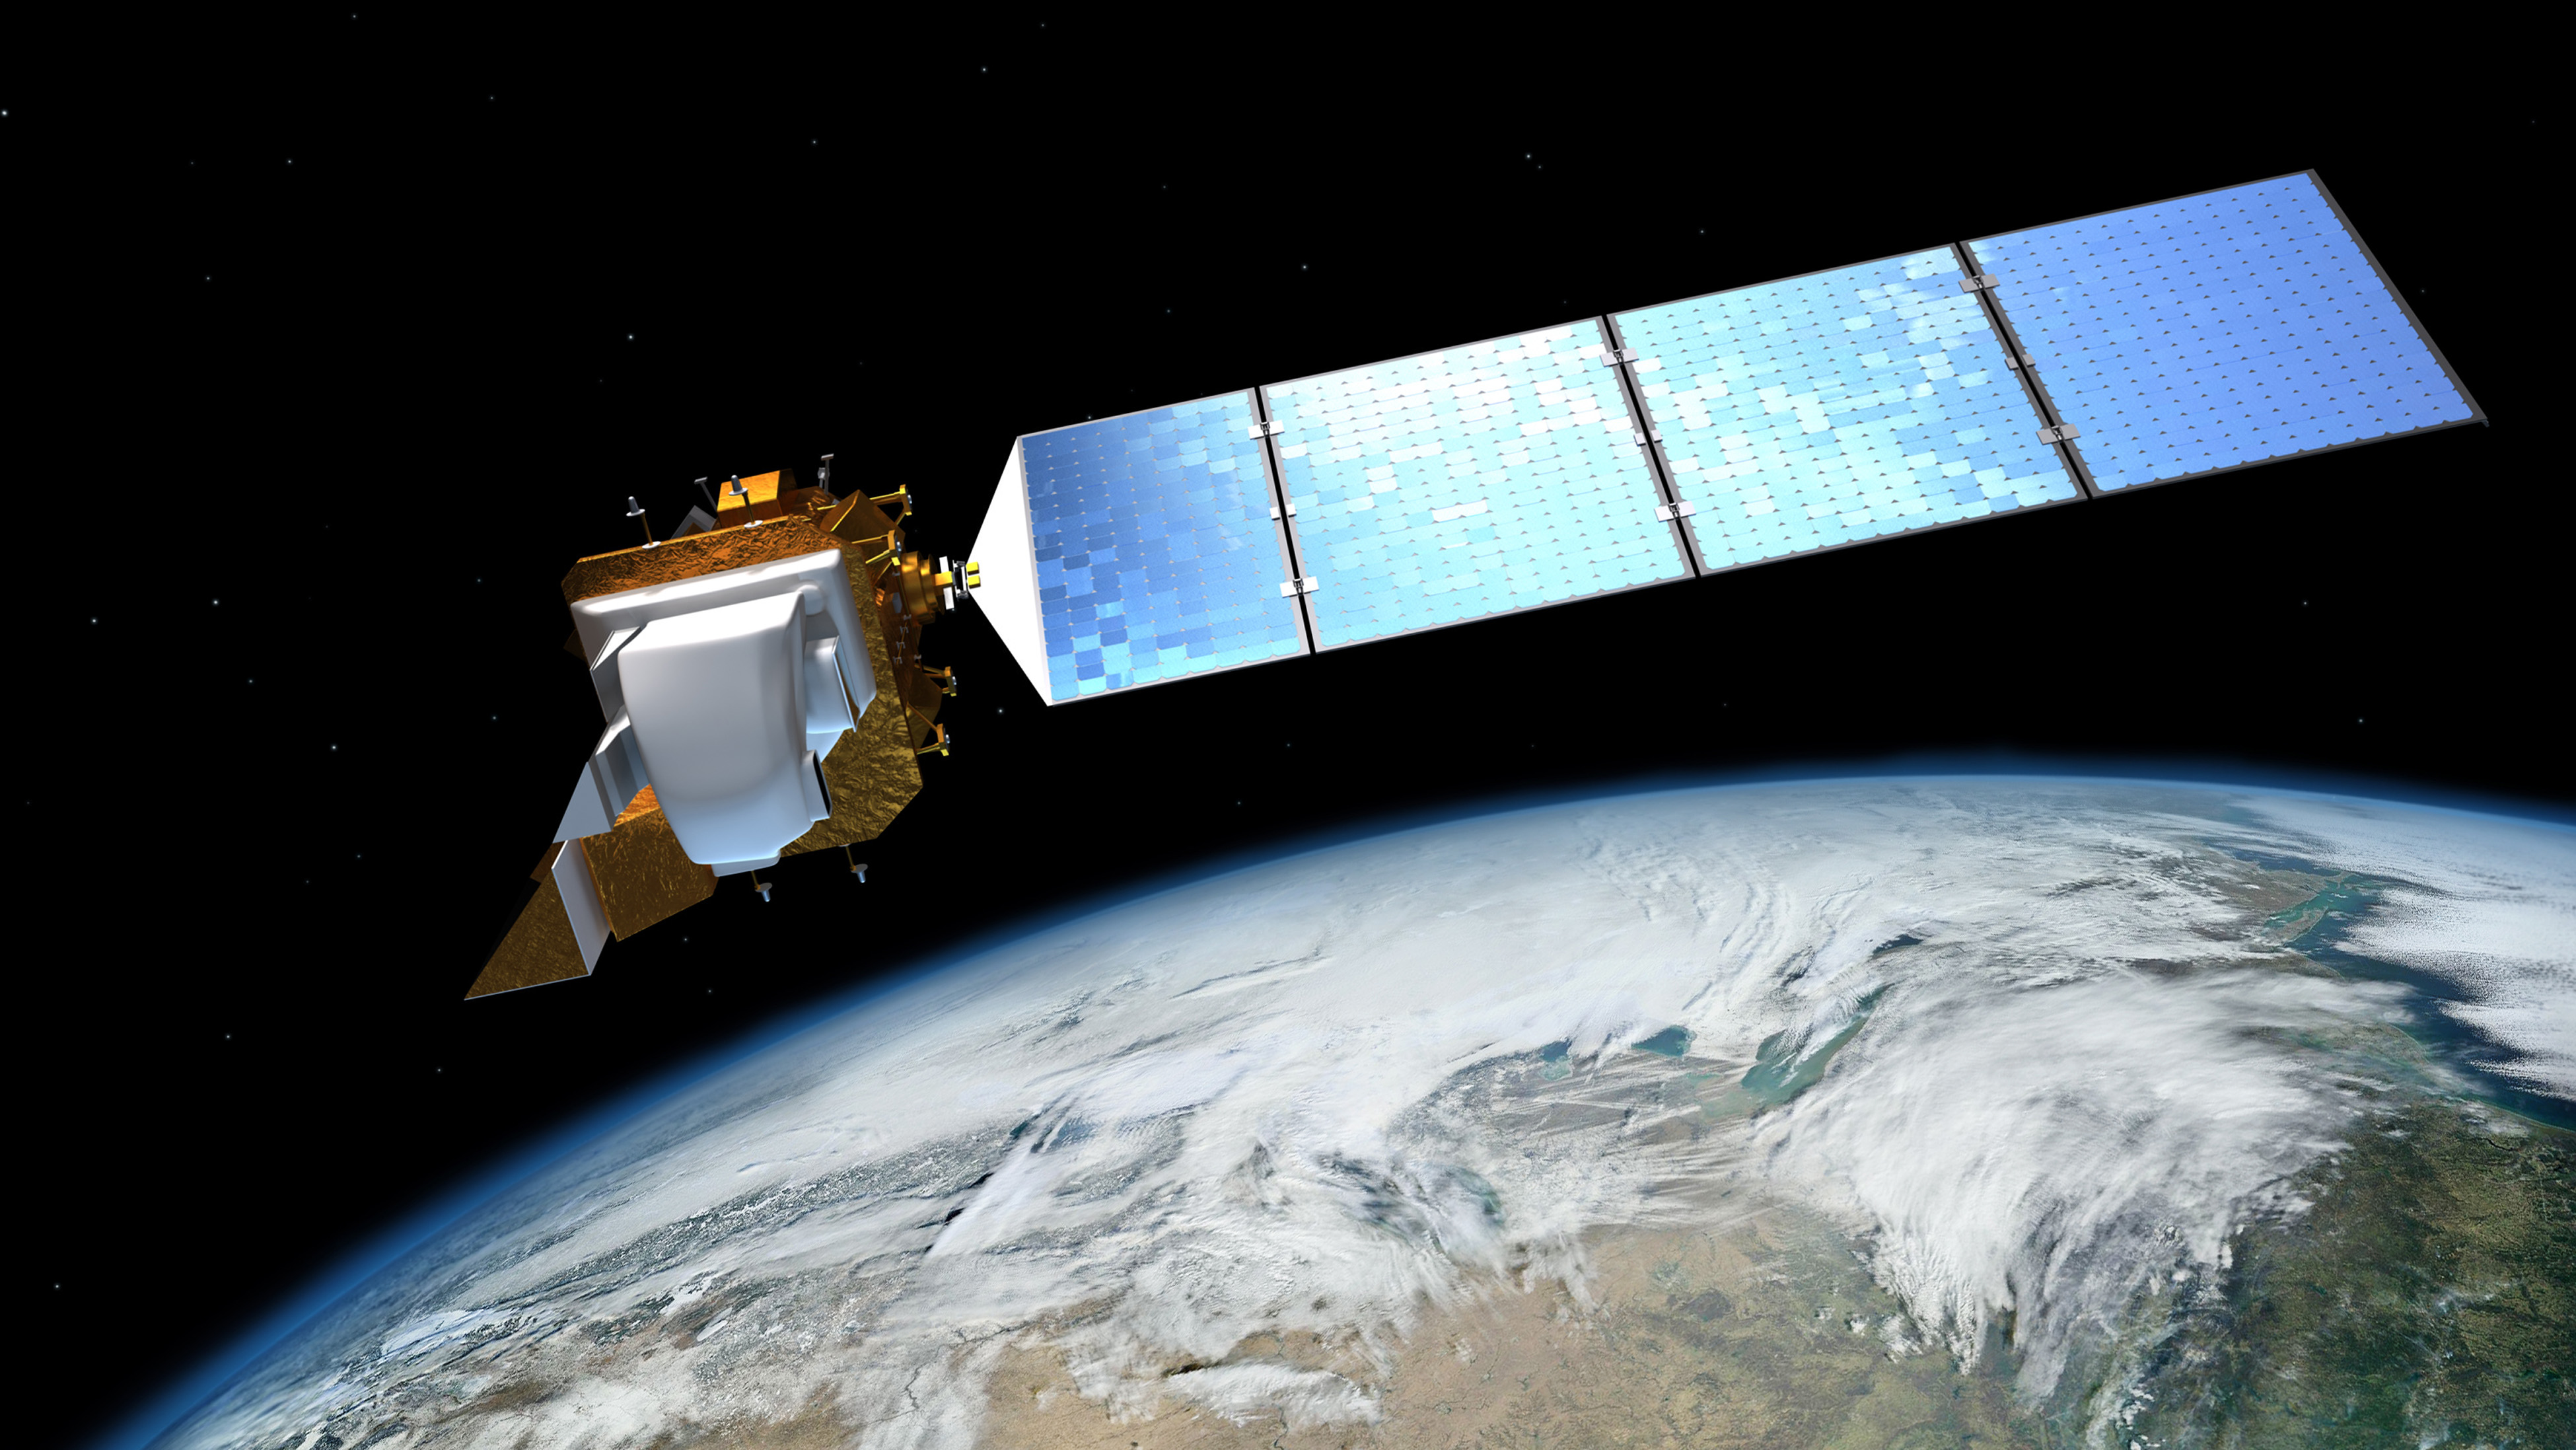 Landsat 8, an Earth Observation satellite operated by NASA